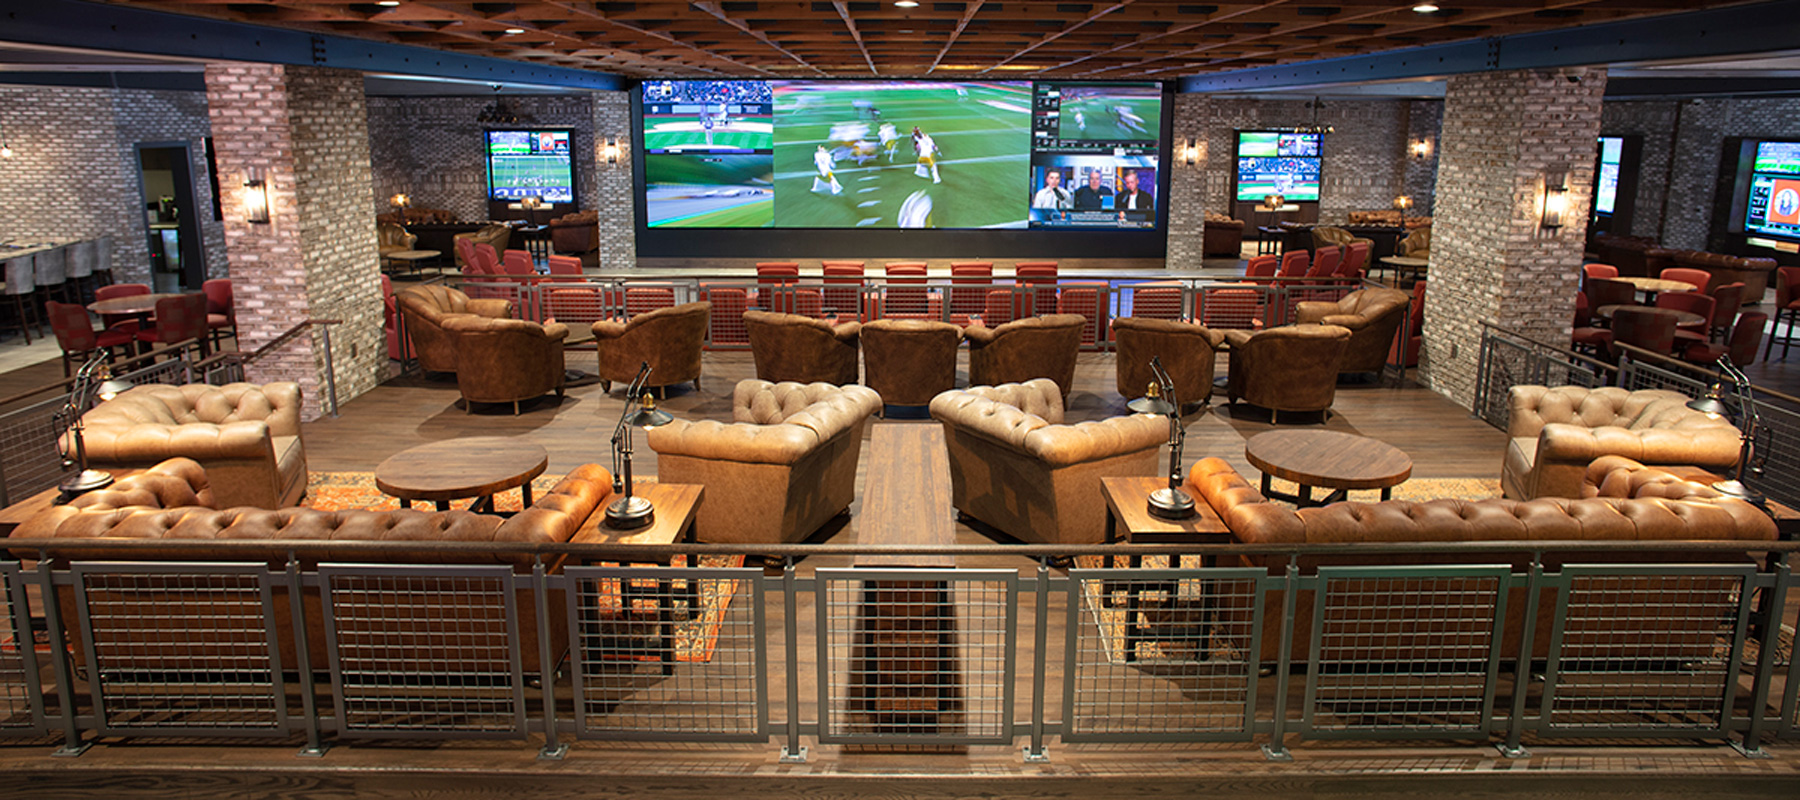 Sports Book Lounge on Game Day